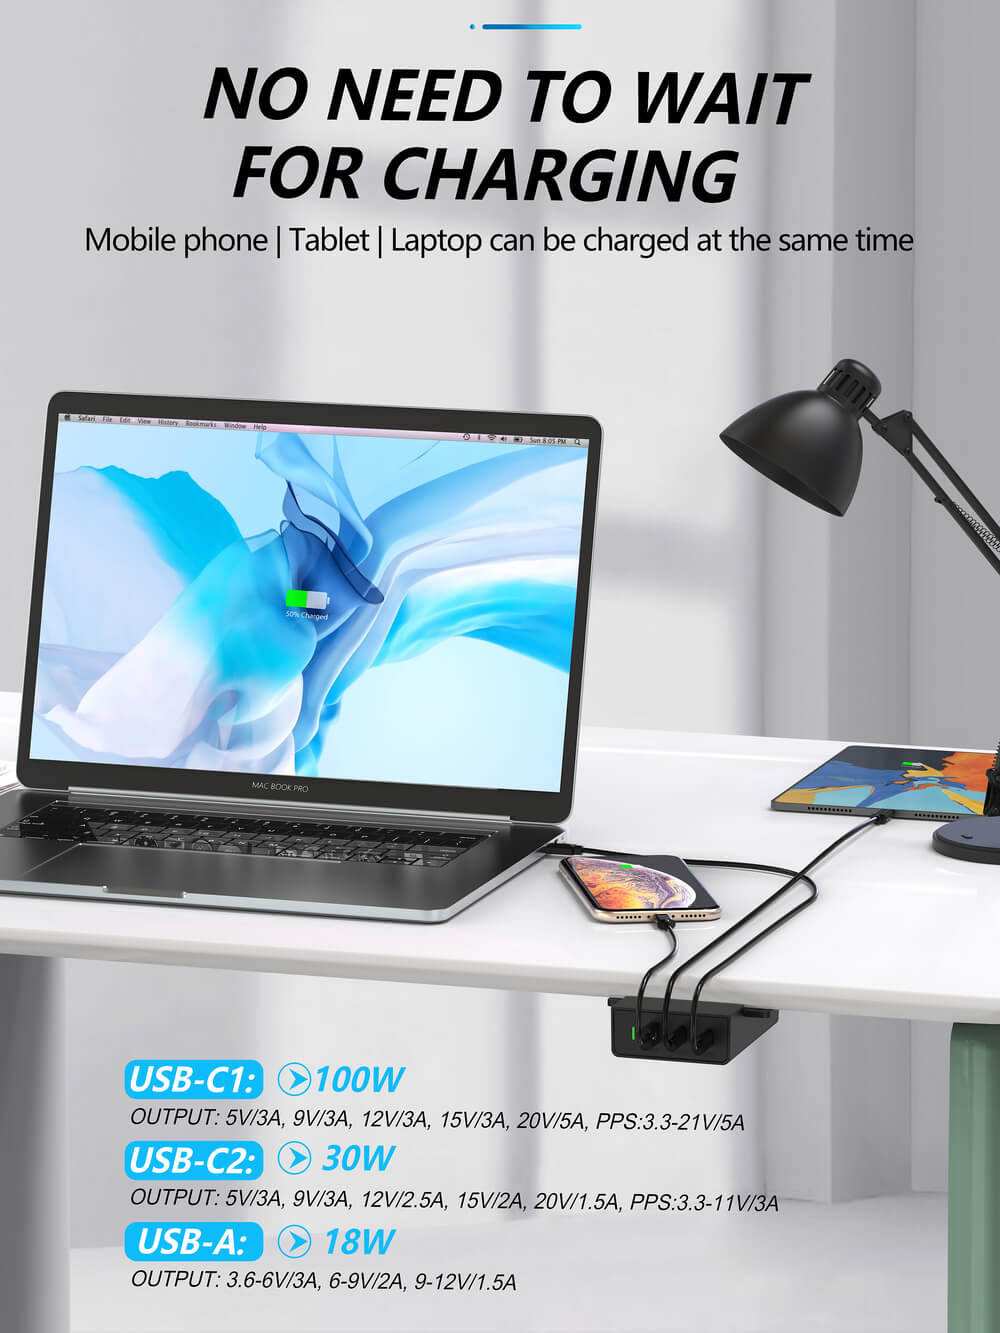 150W PD Charger support charge 3 devices at the same time